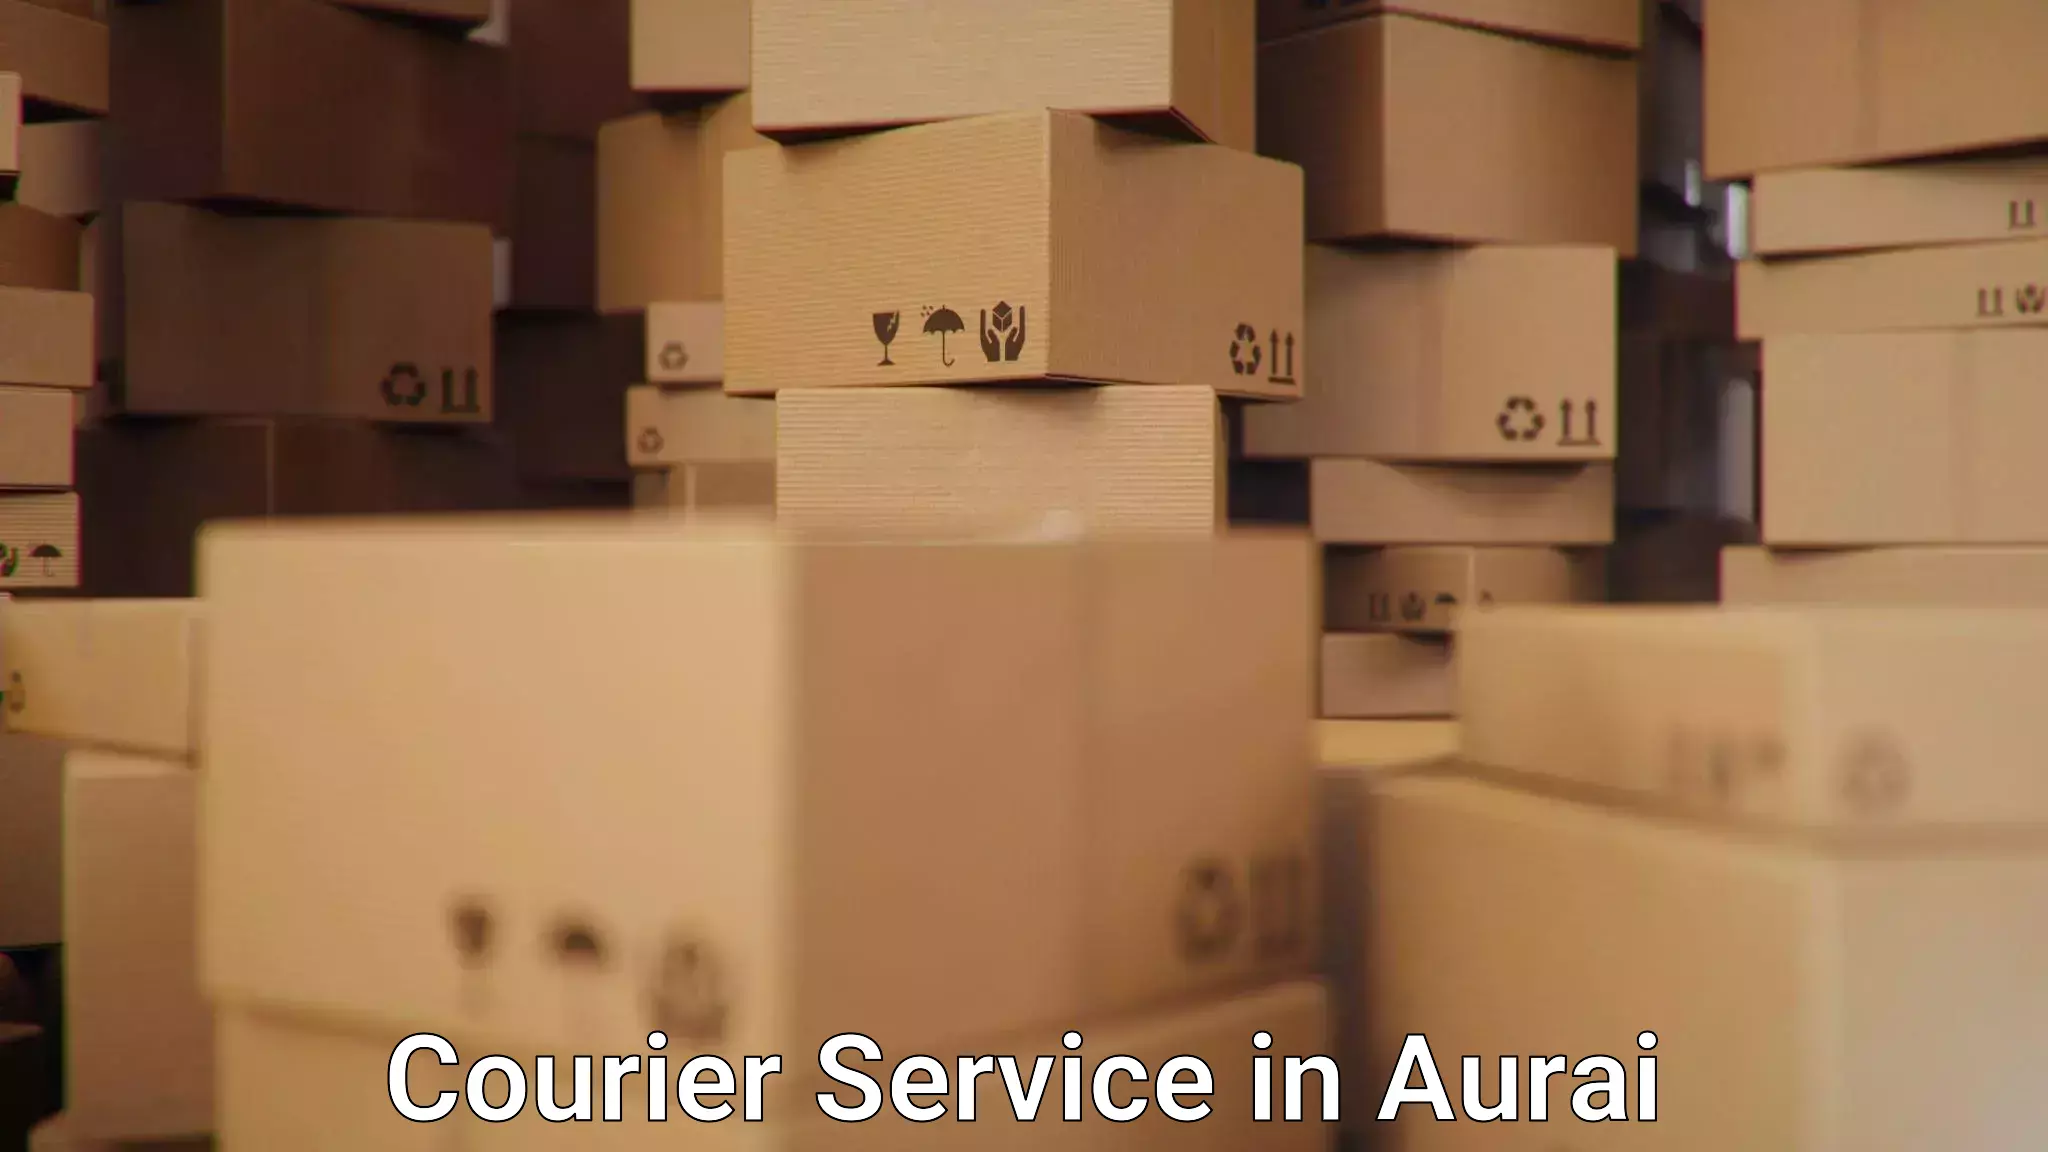 Sustainable shipping practices in Aurai